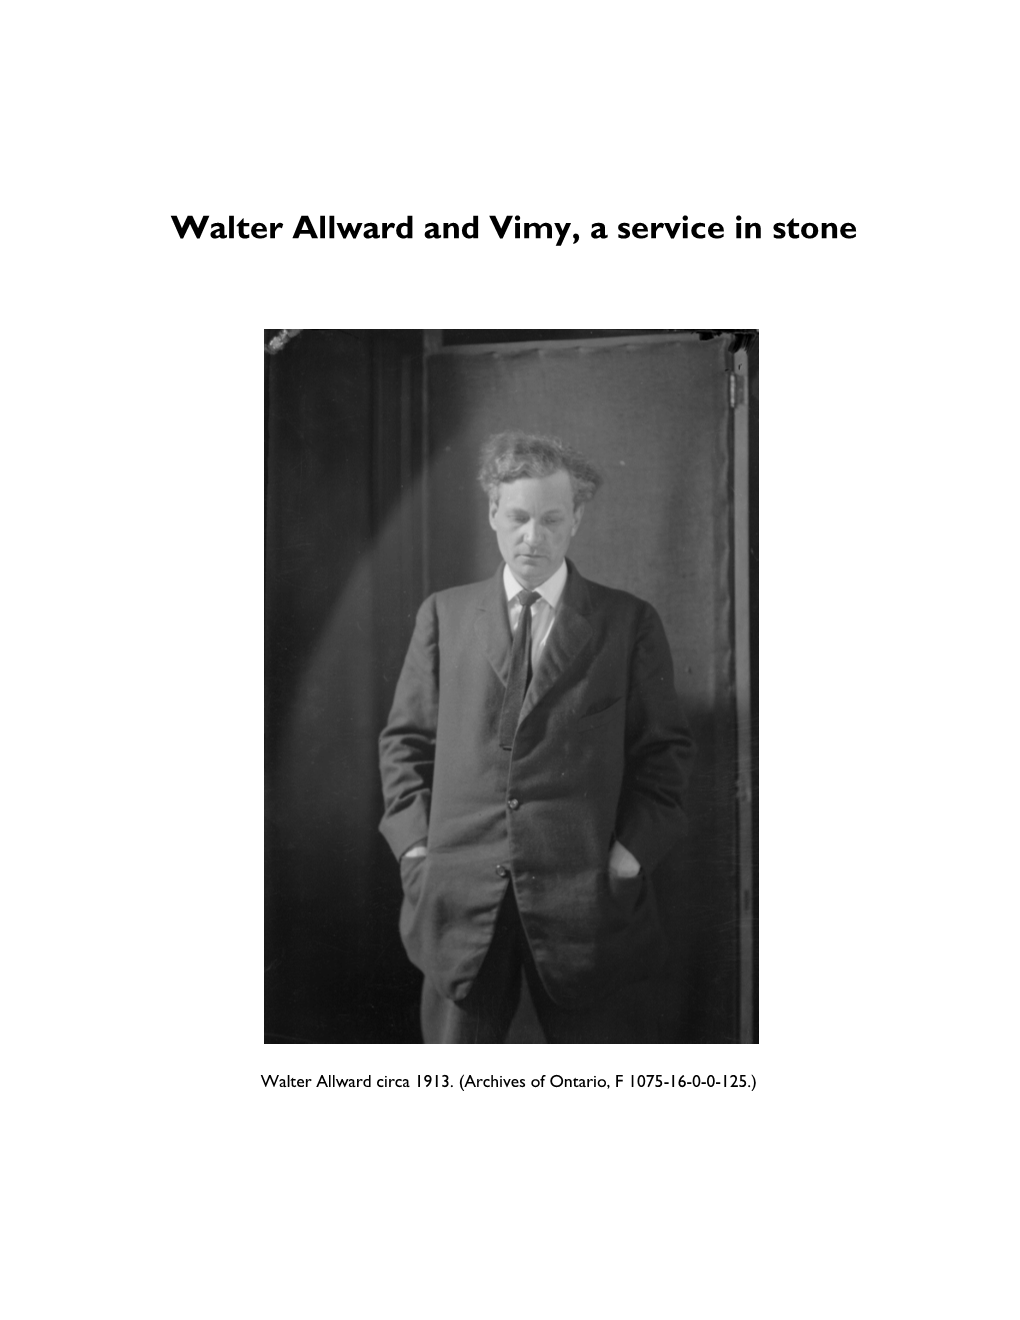 Walter Allward and Vimy, a Service in Stone